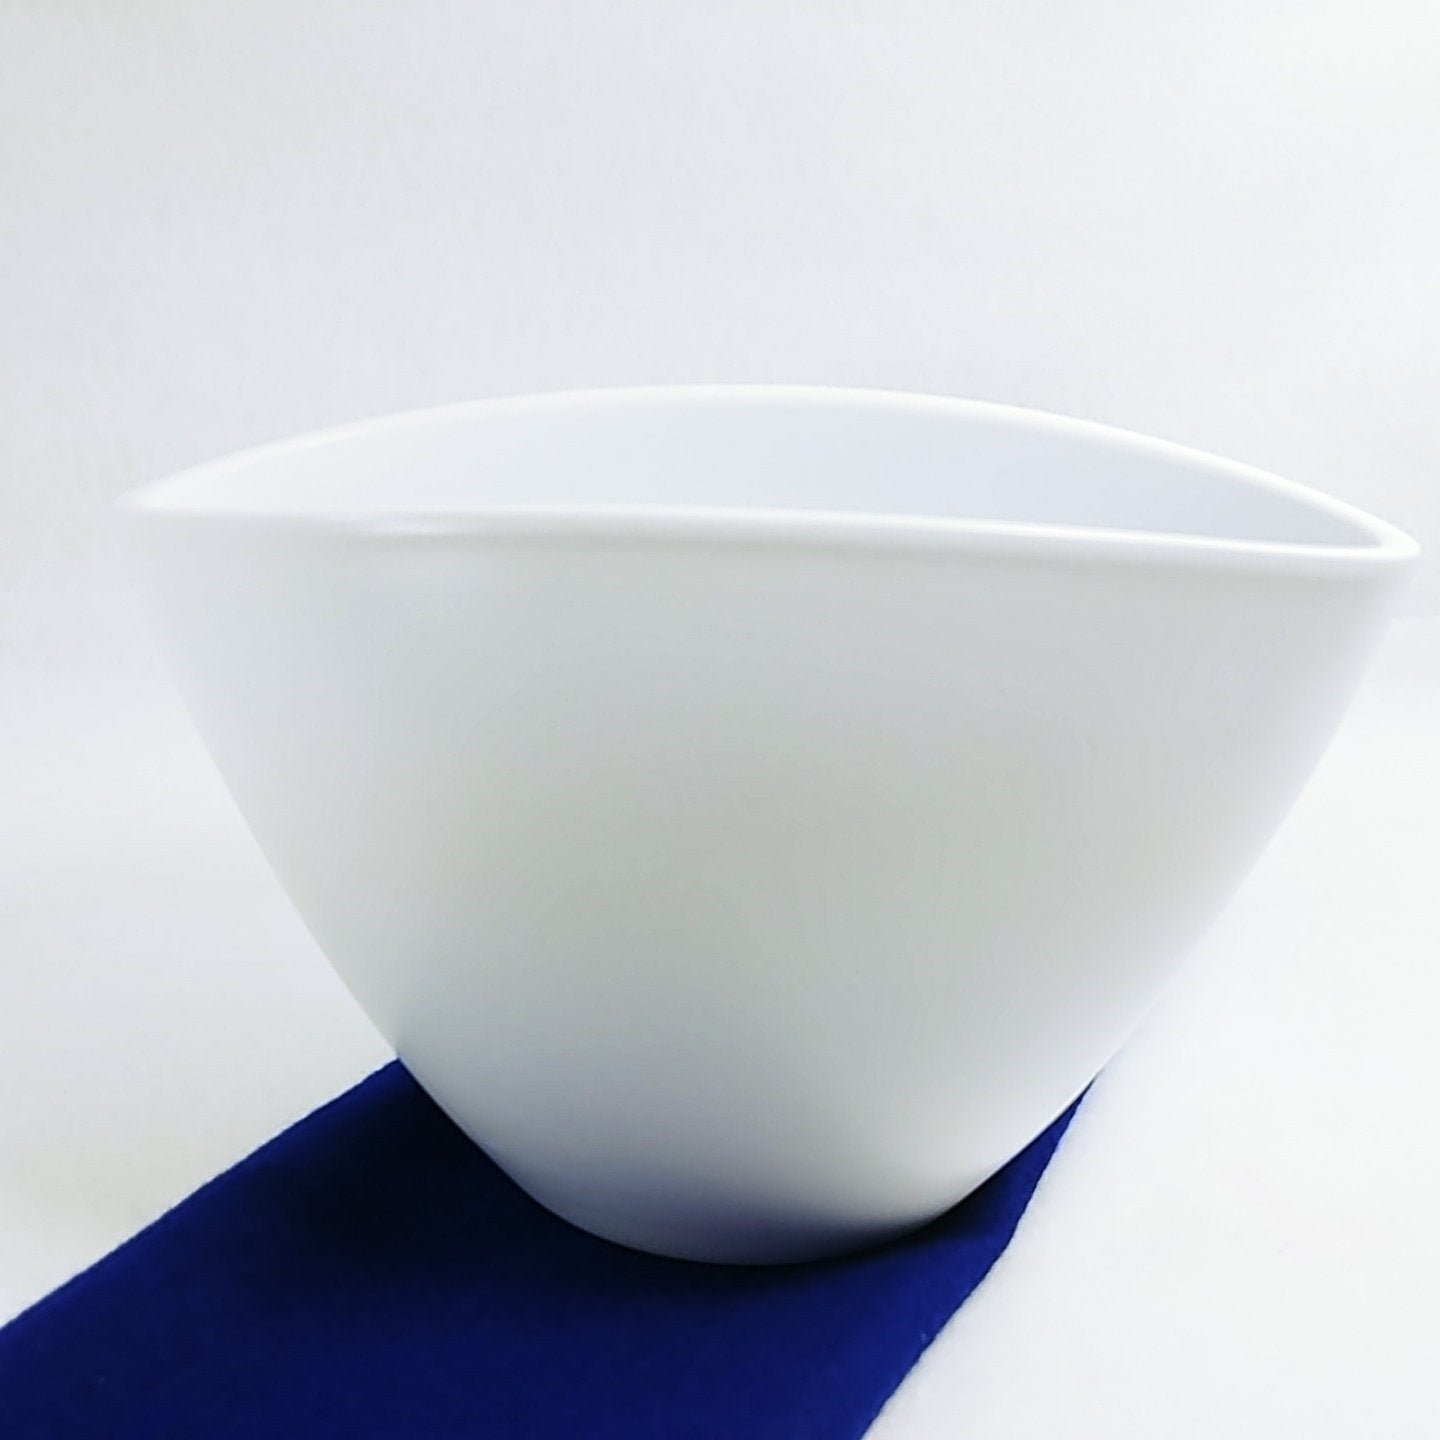 Ceramic Art Bowl, Modern Curved Look, Made in Germany Retro Modern